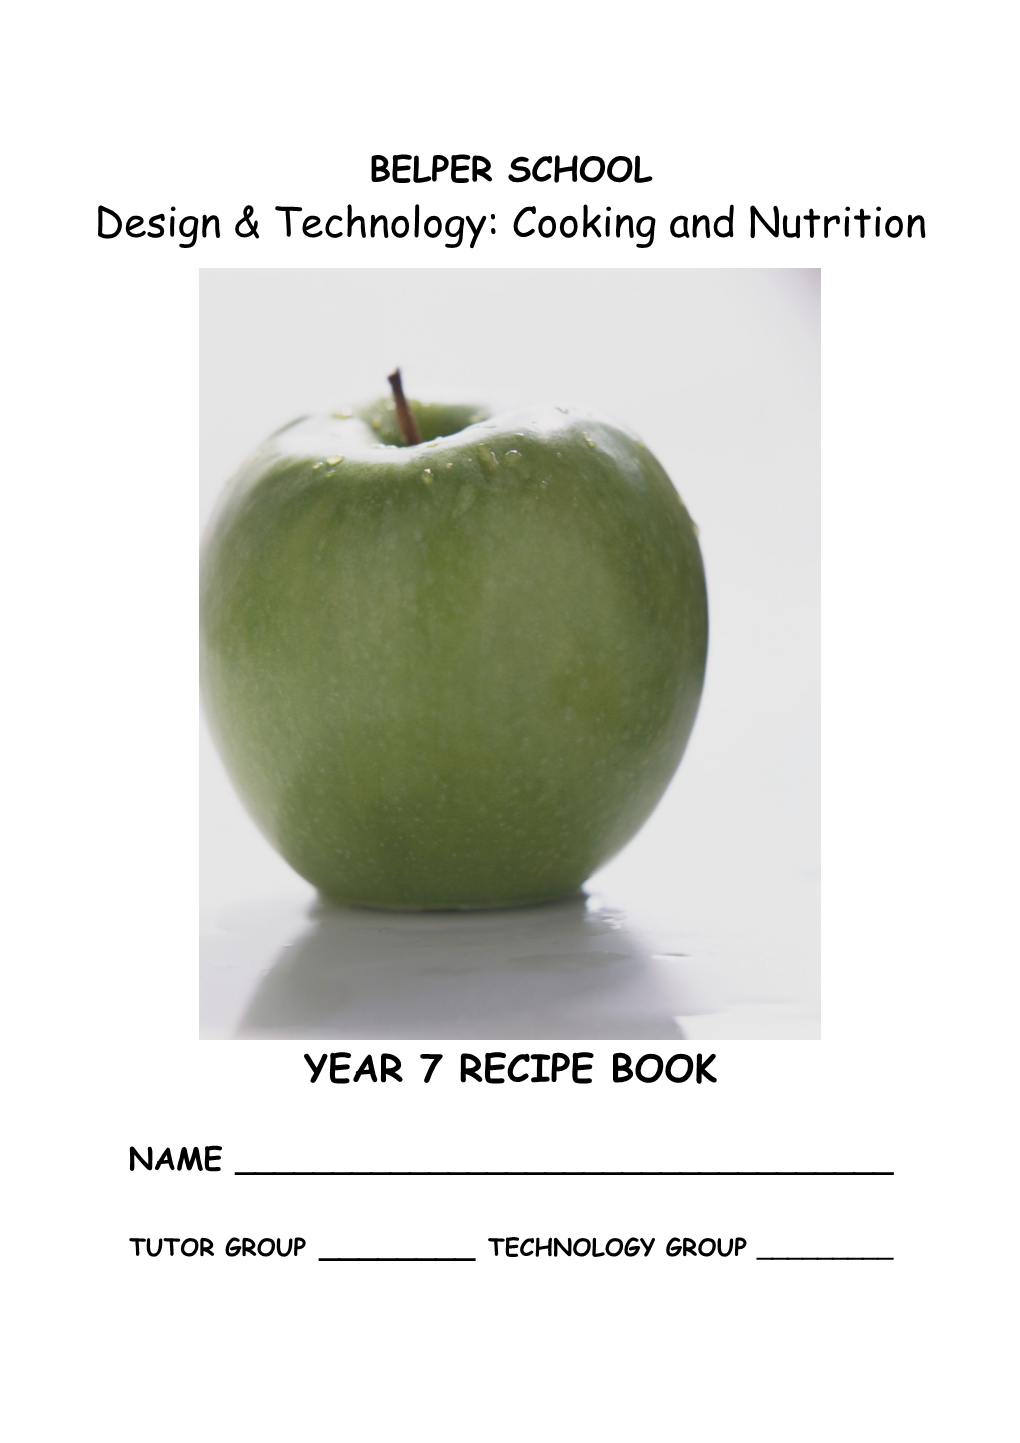 Design & Technology: Cooking and Nutrition